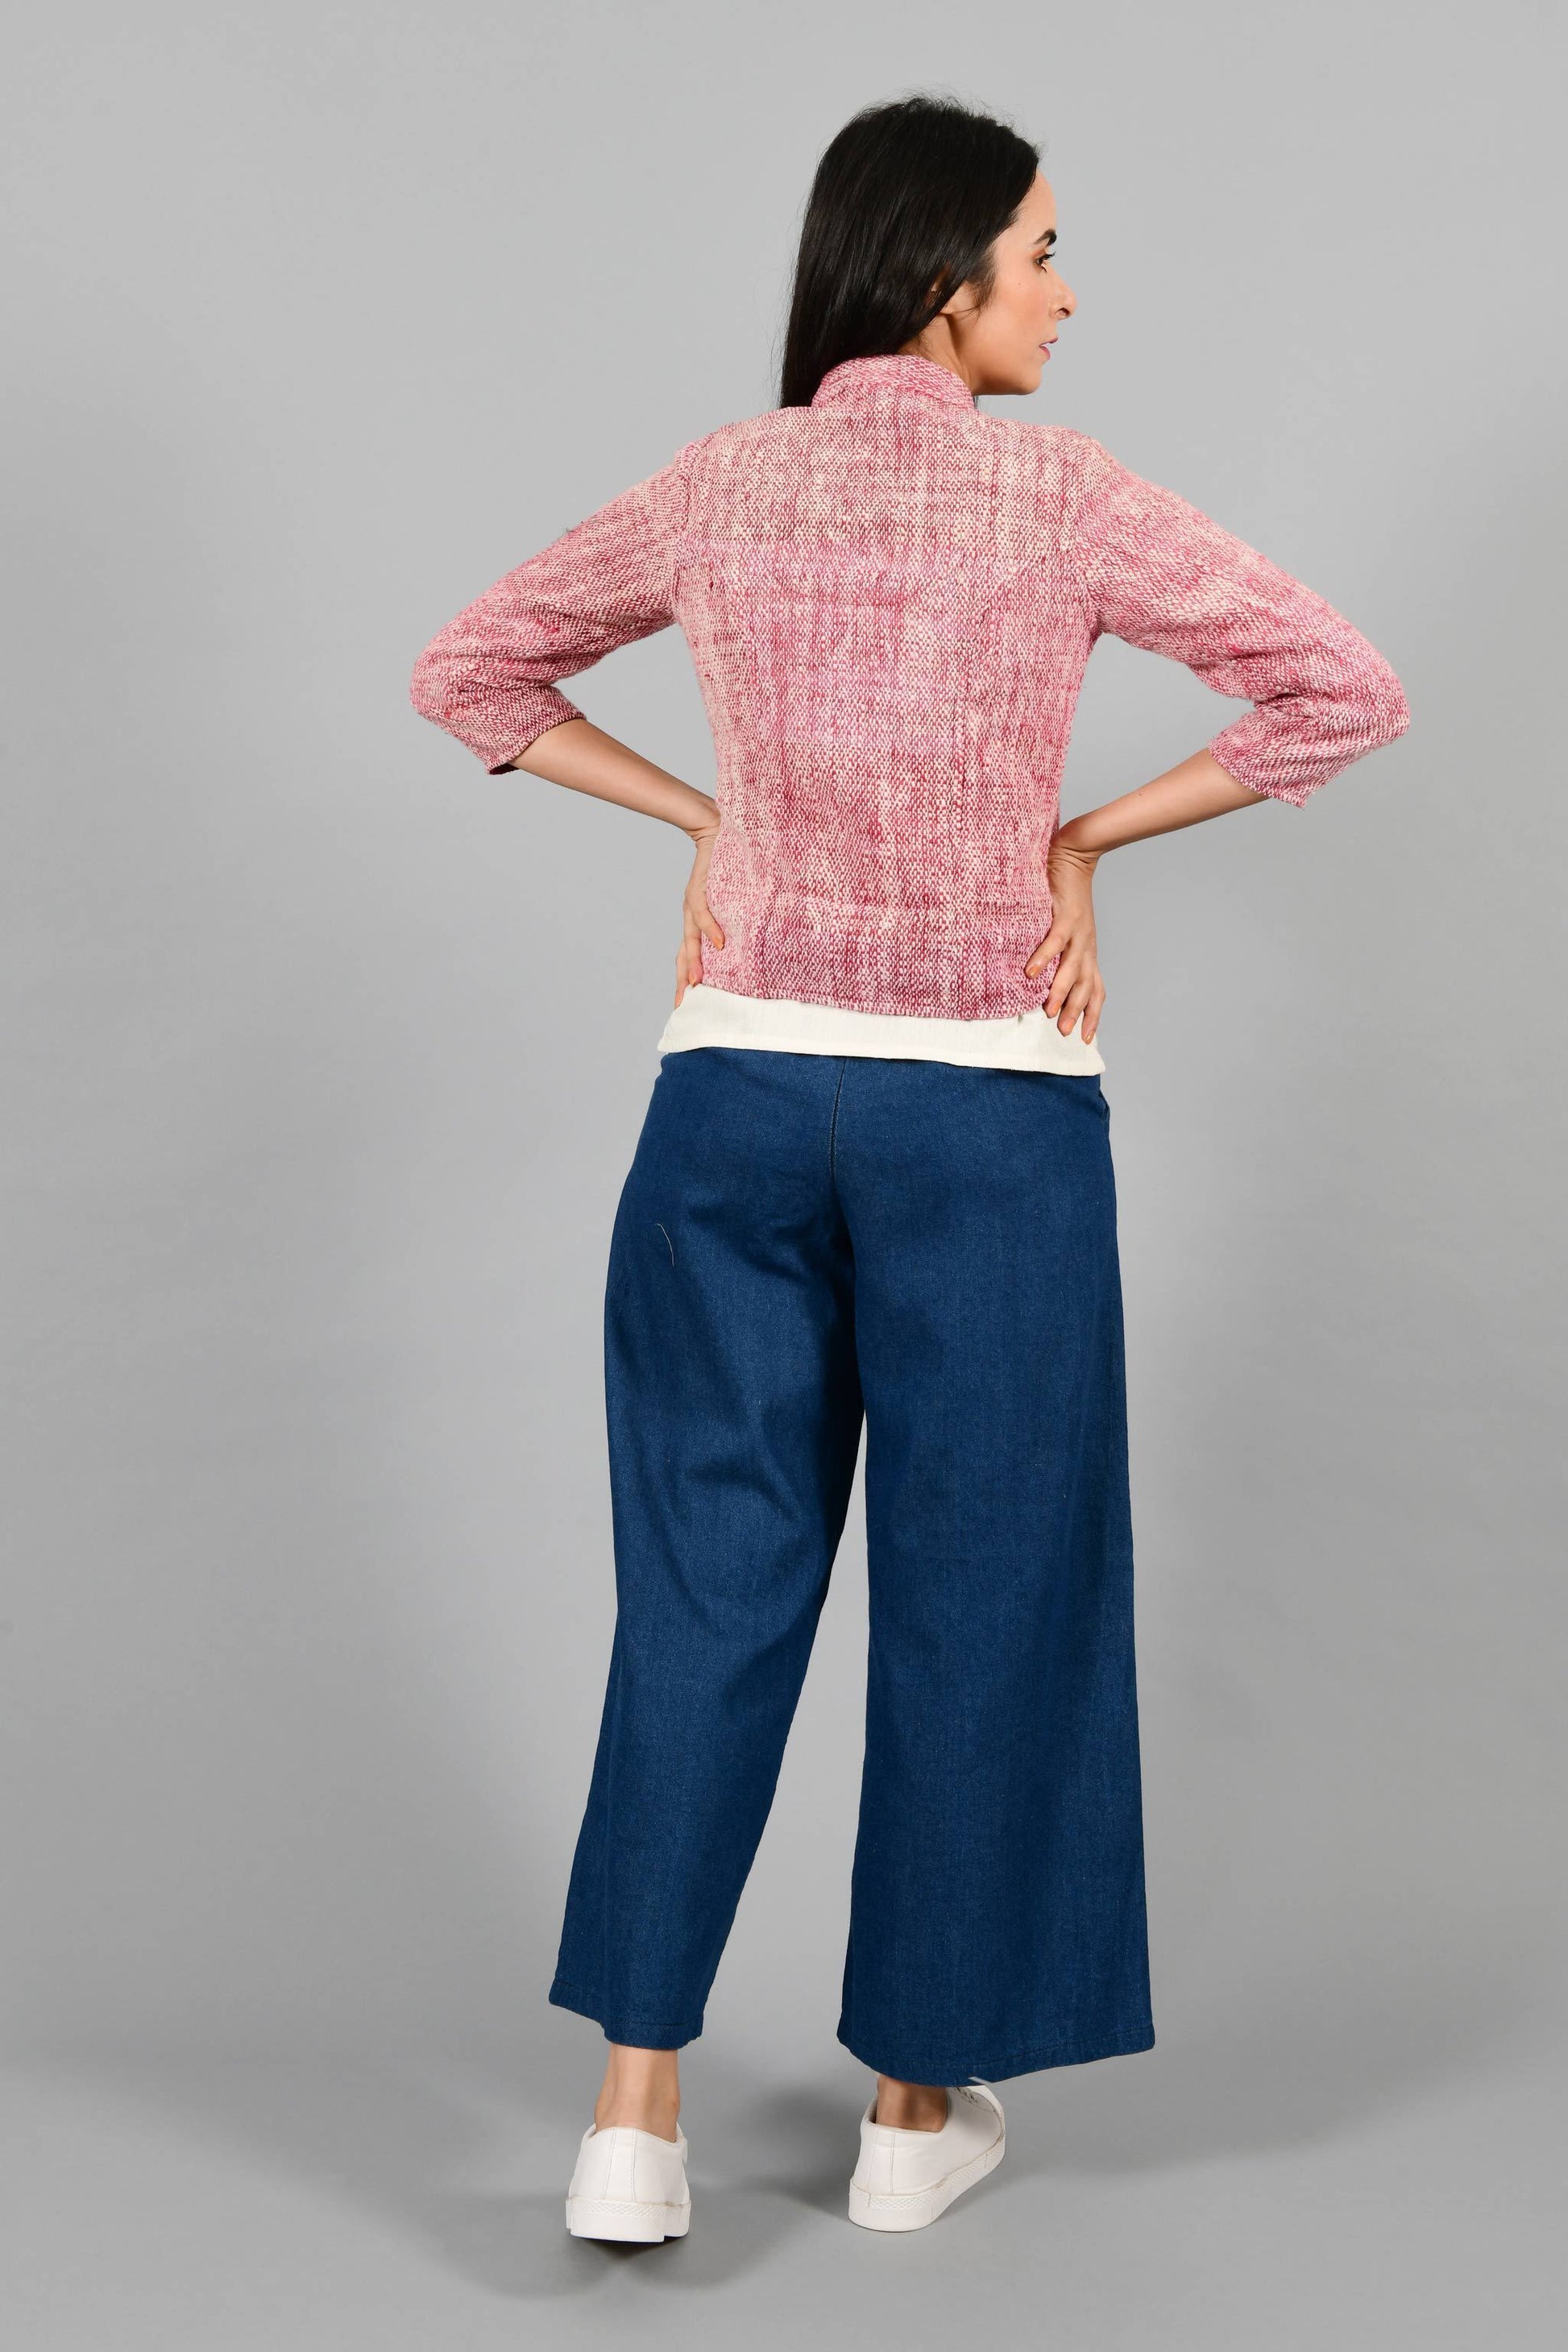 Back pose of an Indian Womenswear female model wearing plum red Gandhi Charkha spun and handwoven khadi buttoned mandarin collar Jacket over an off-white spaghetti and indigo palazzos by Cotton Rack.